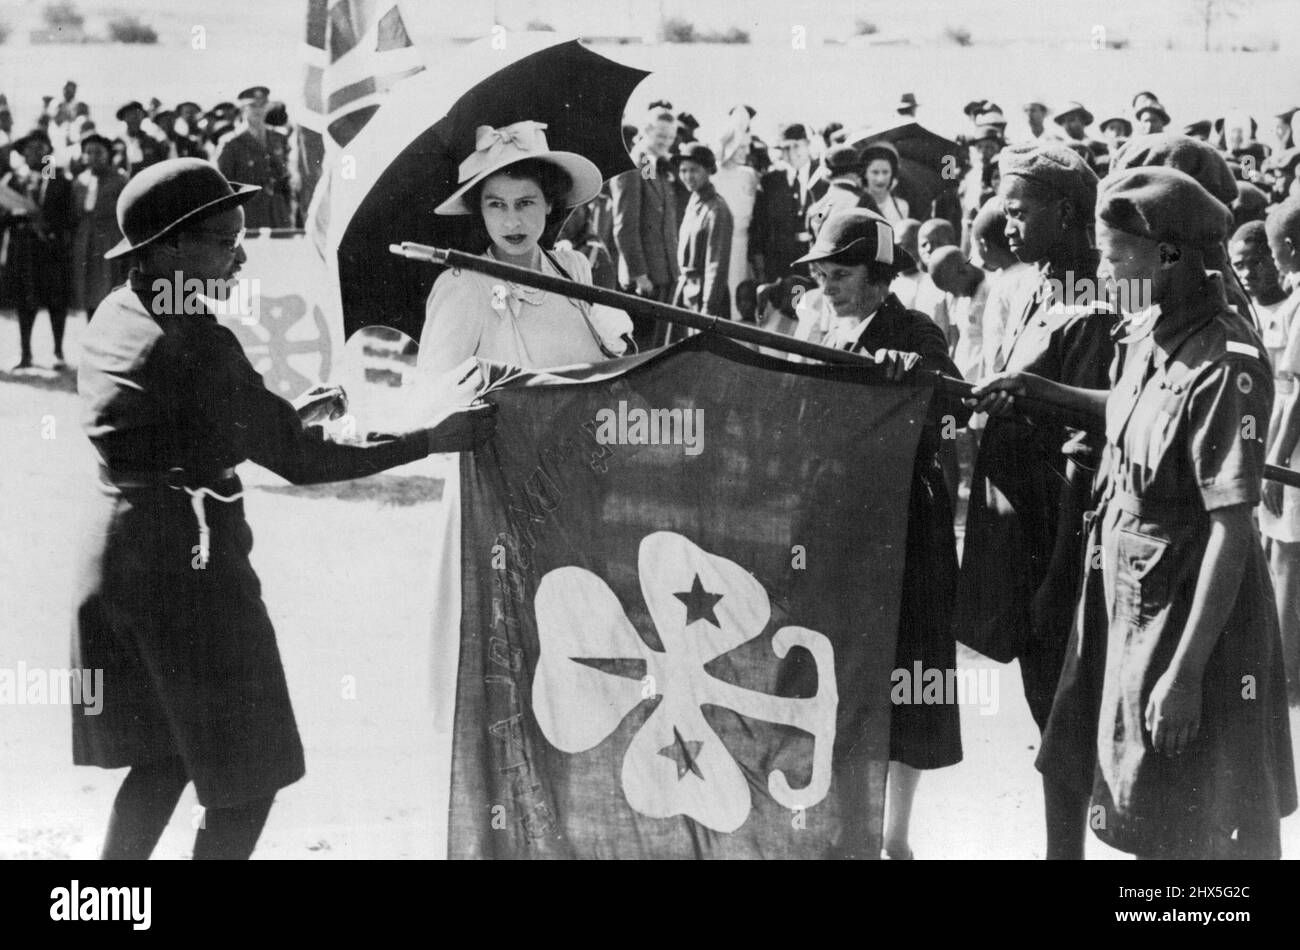 Over 70,000 Basuto Greet Royal Family -- H.R.H. Princess Elizabeth examines a banner at a Parade of native Girl Guides held at Maseru in honor of the Royal Visit. Between 70,000 and 90,000 Basuto assembled in and around Maseru to welcome the Royal family, Many of the natives had trekked for more than a week, camping by the wayside, in order to be in capital to pay homage to their king. March 17, 1947. Stock Photo